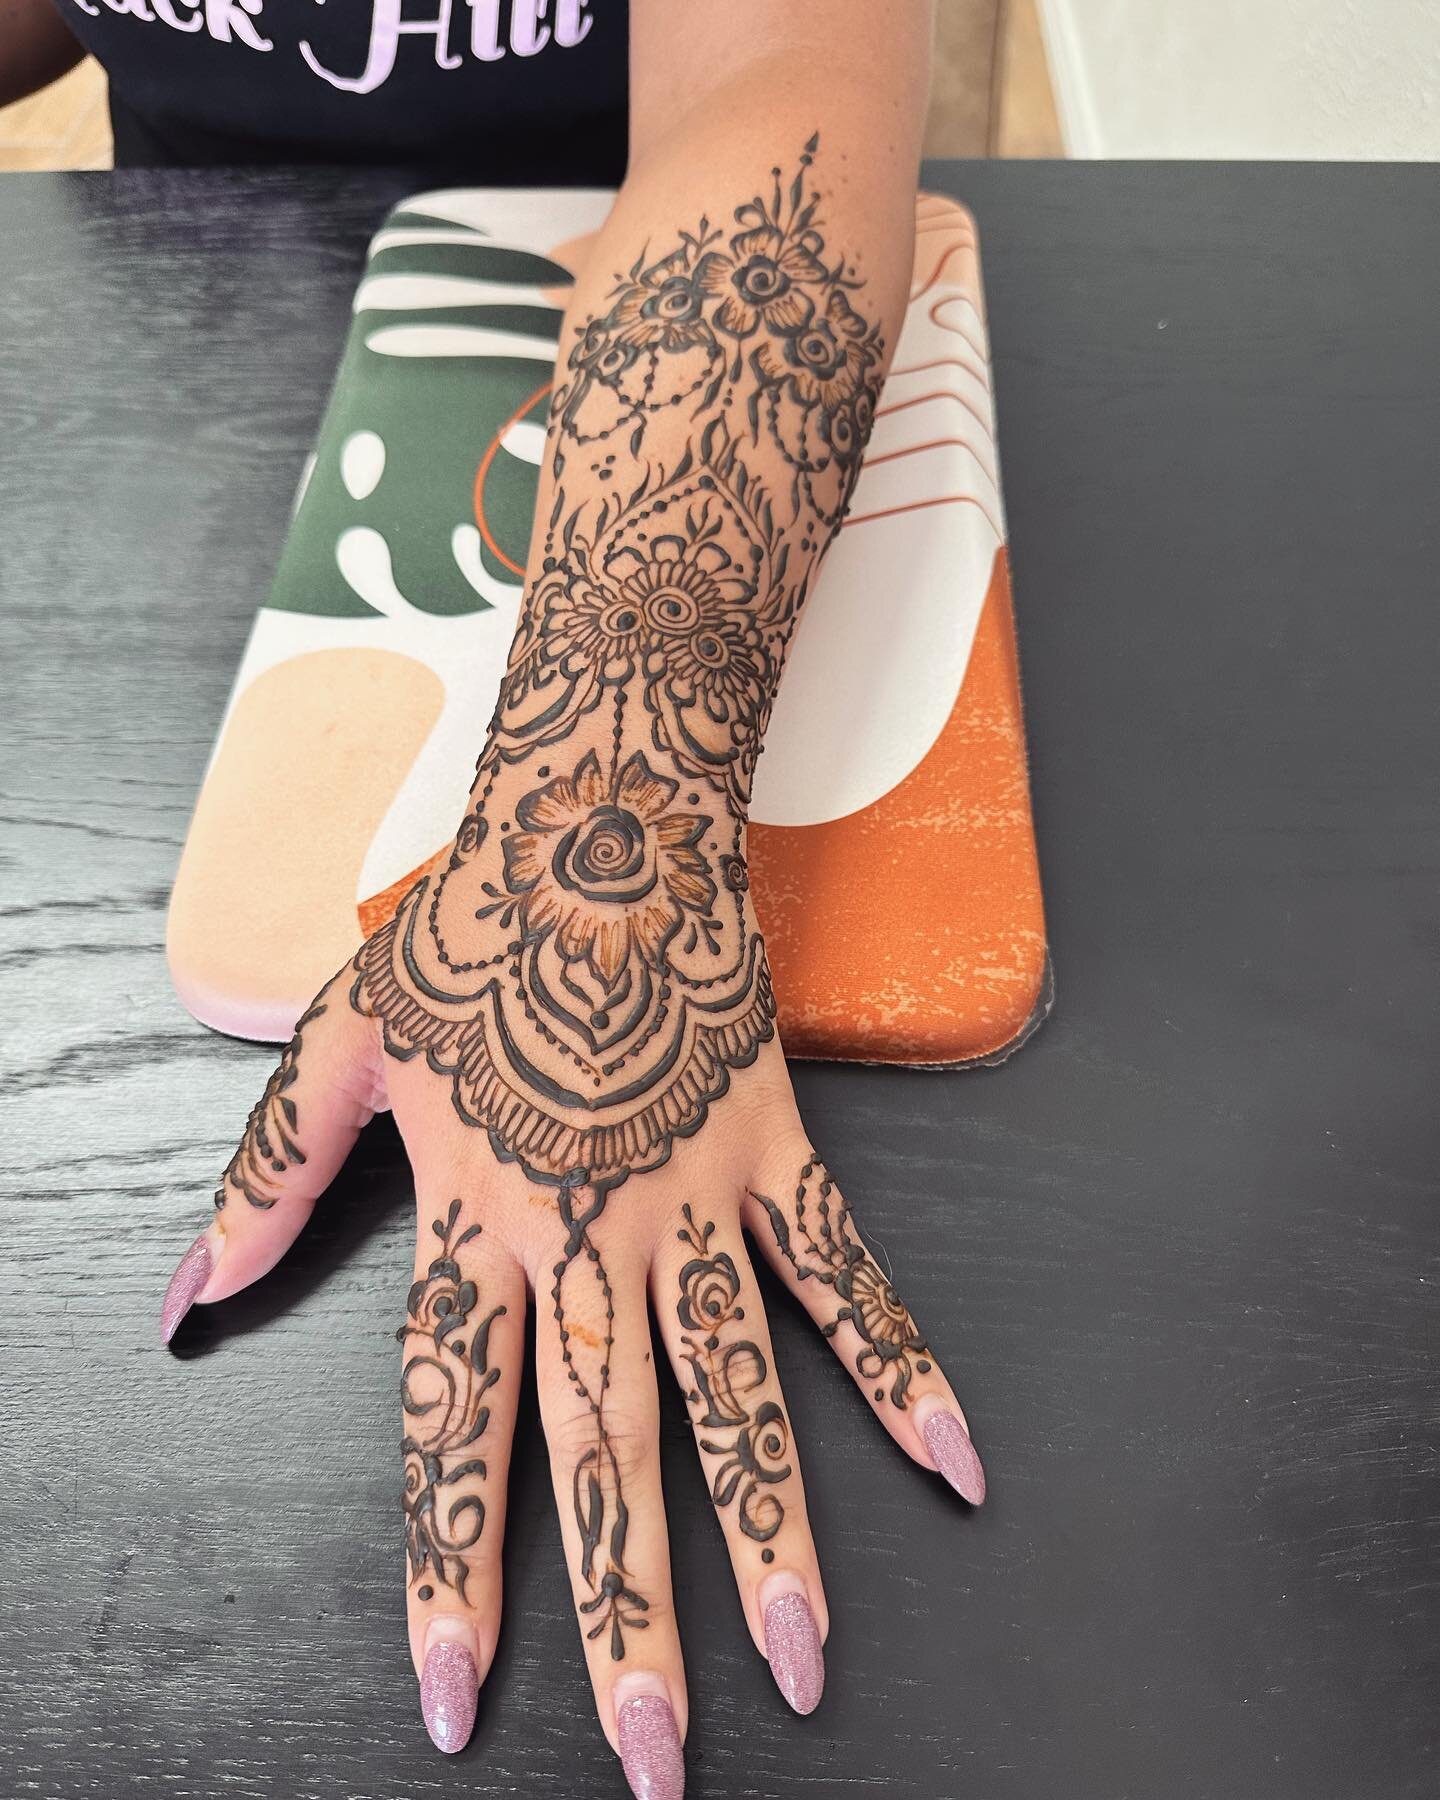 How pretty is this design? She said she likes flowers and said say when 😅. For all the flower lovers&hellip;. What do you think?? 
#flowerhenna #henna #dallashenna #flowerbodyart #naturalhenna #mehndi #bridalhenna #dallastattoo #jagua